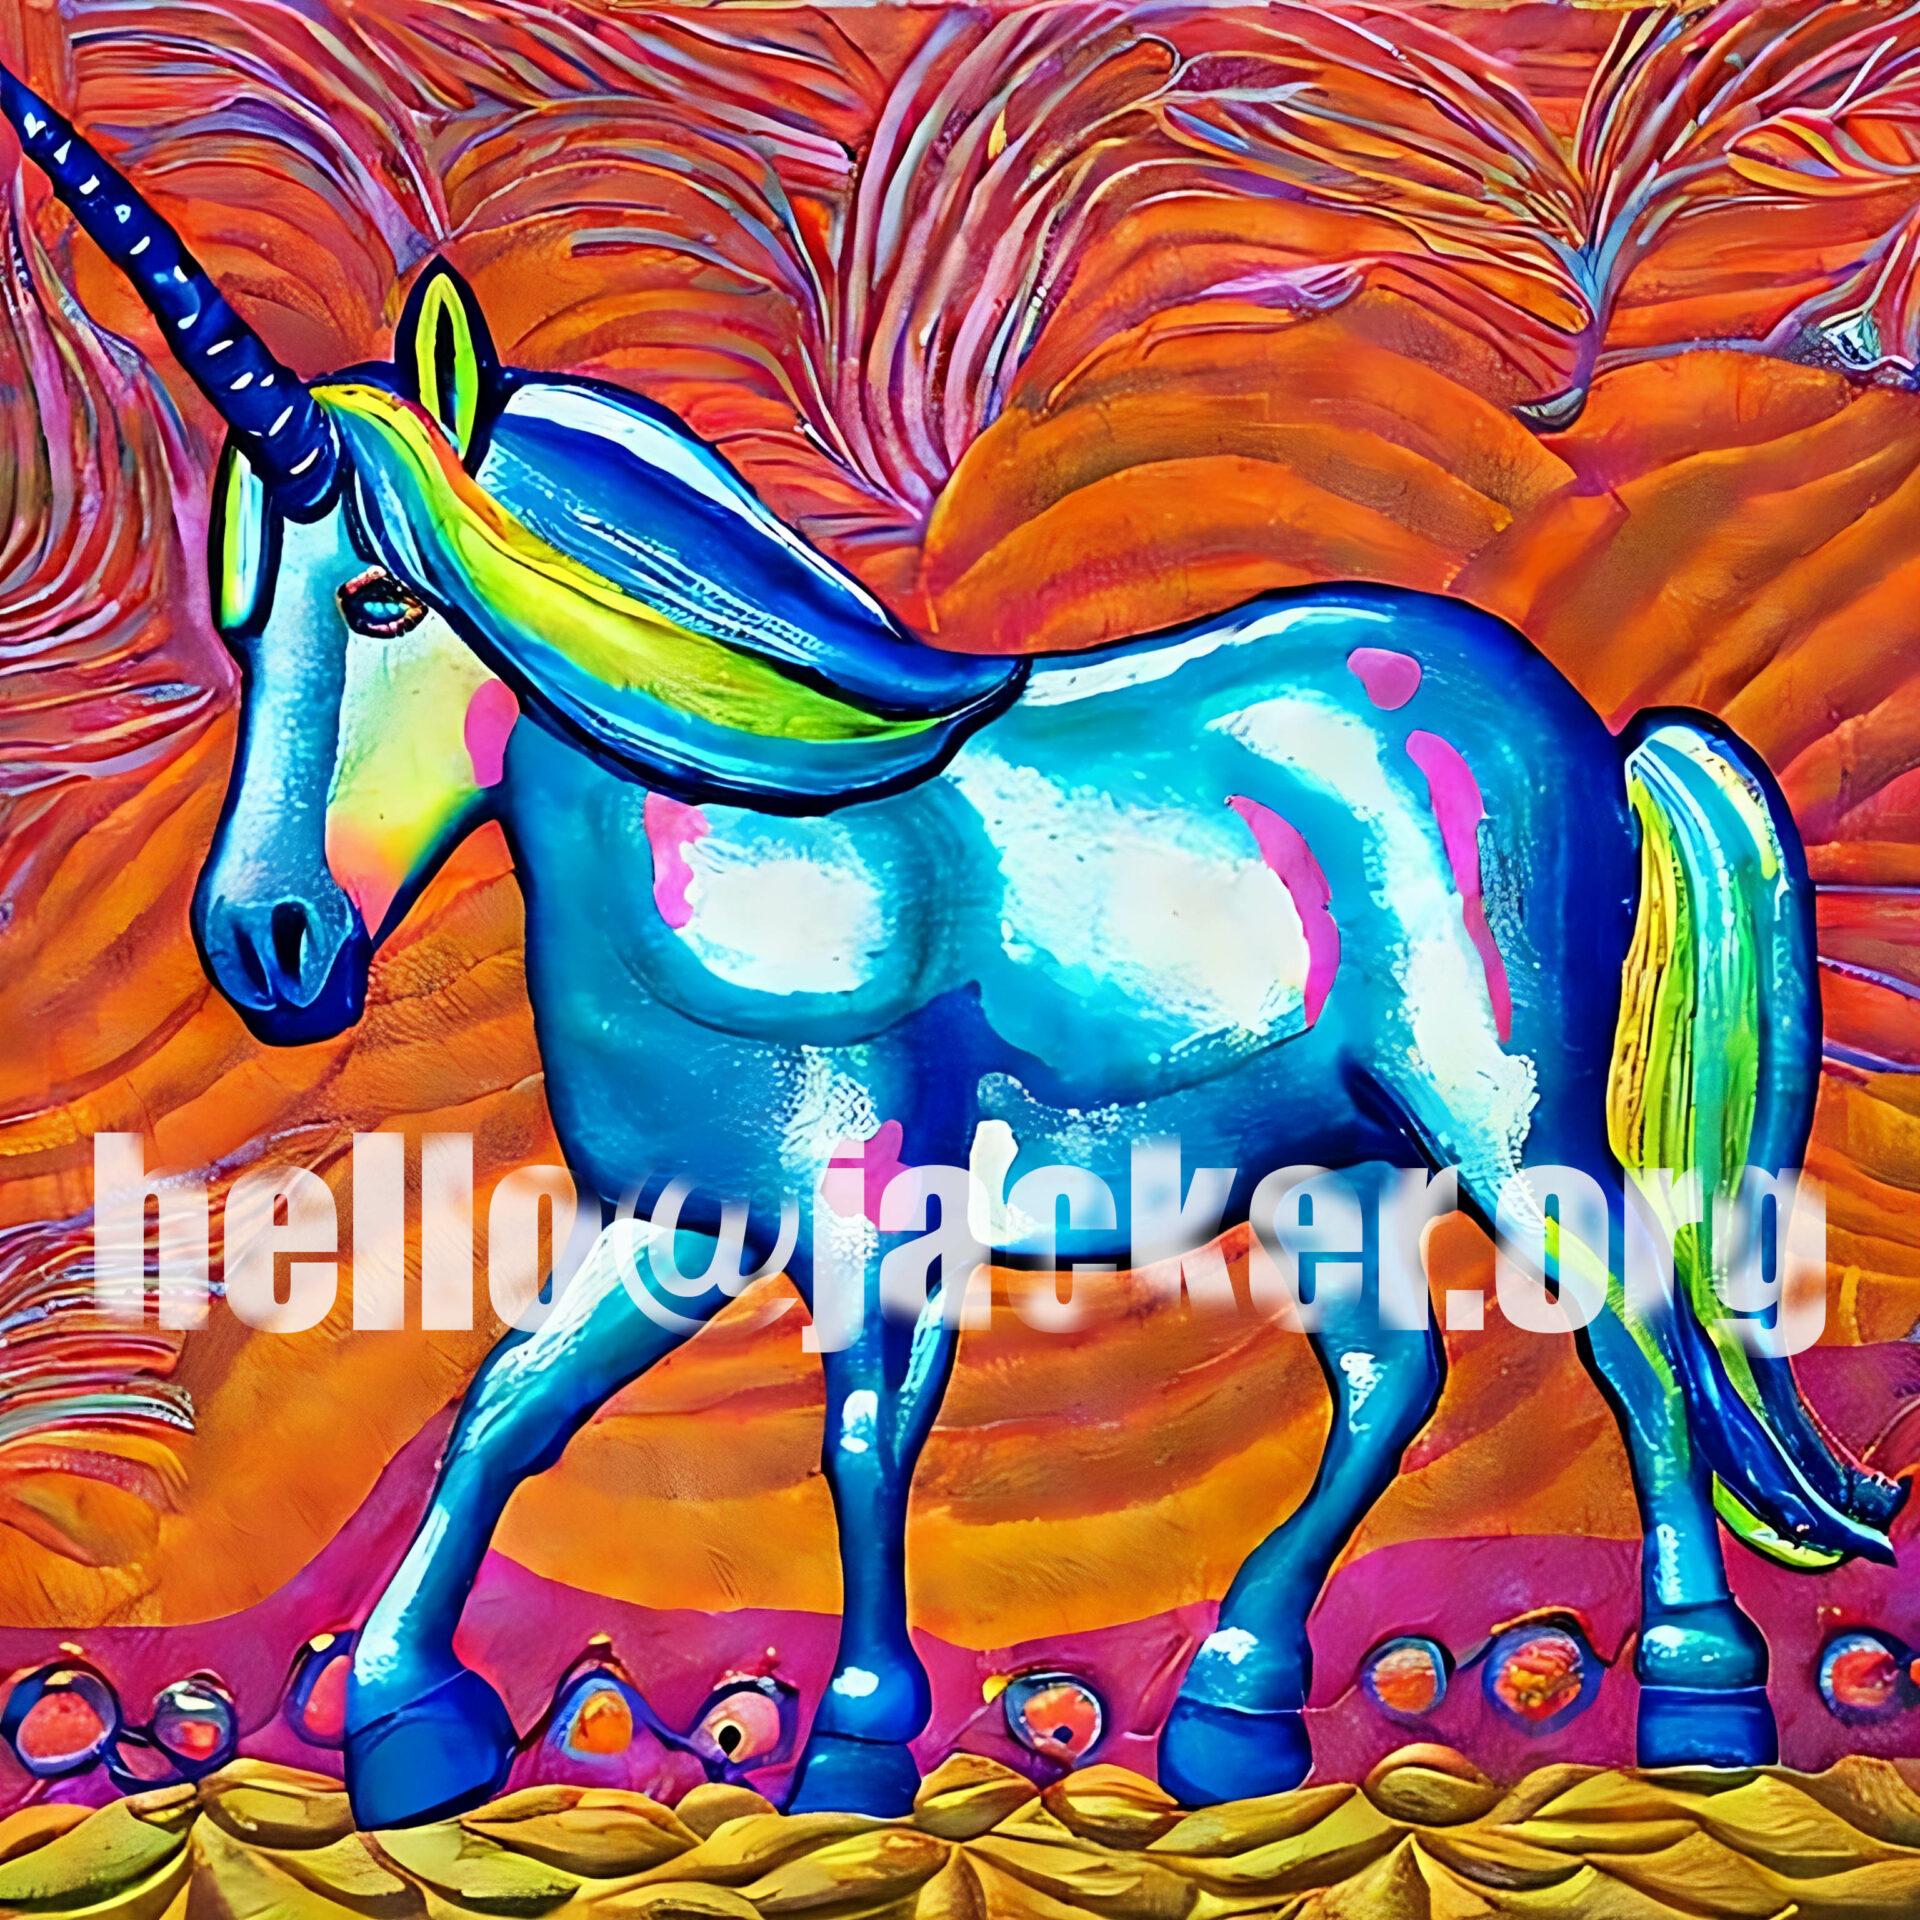 Unicorn with hidden email address